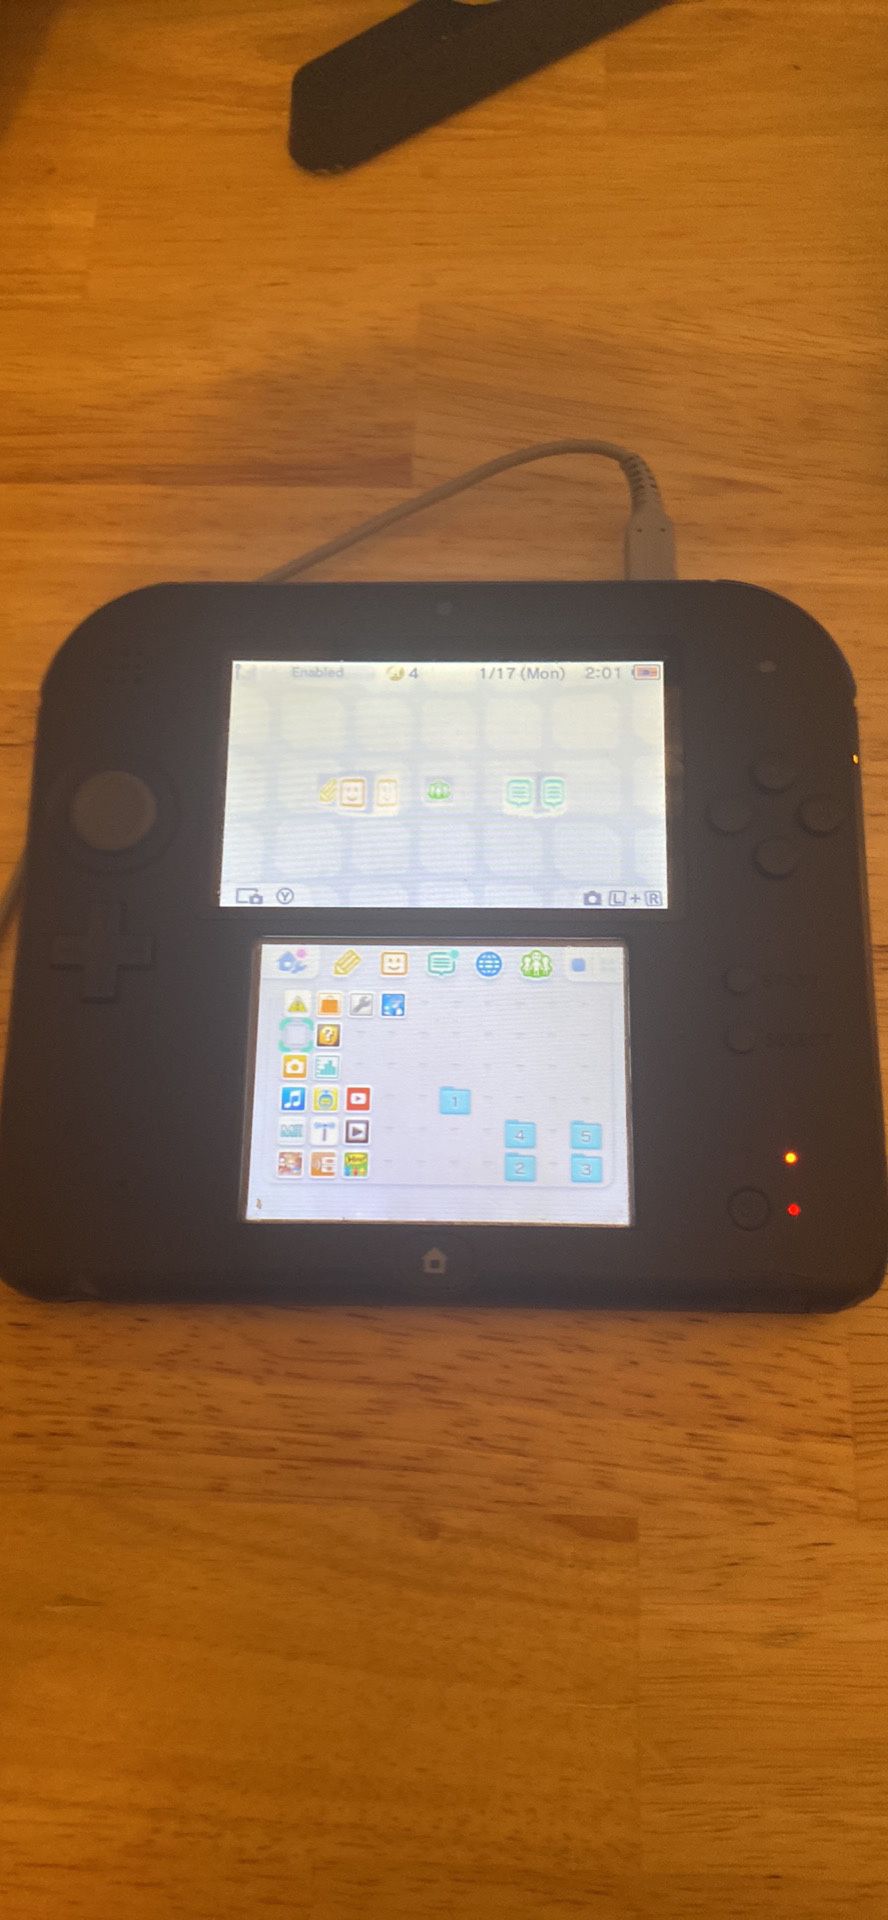 NINTENDO 2DS (INCLUDES CASE, STYLUS, CHARGER, AND 10 GAMES) PRICE IS NEGOTIABLE, READ DESCRIPTION!